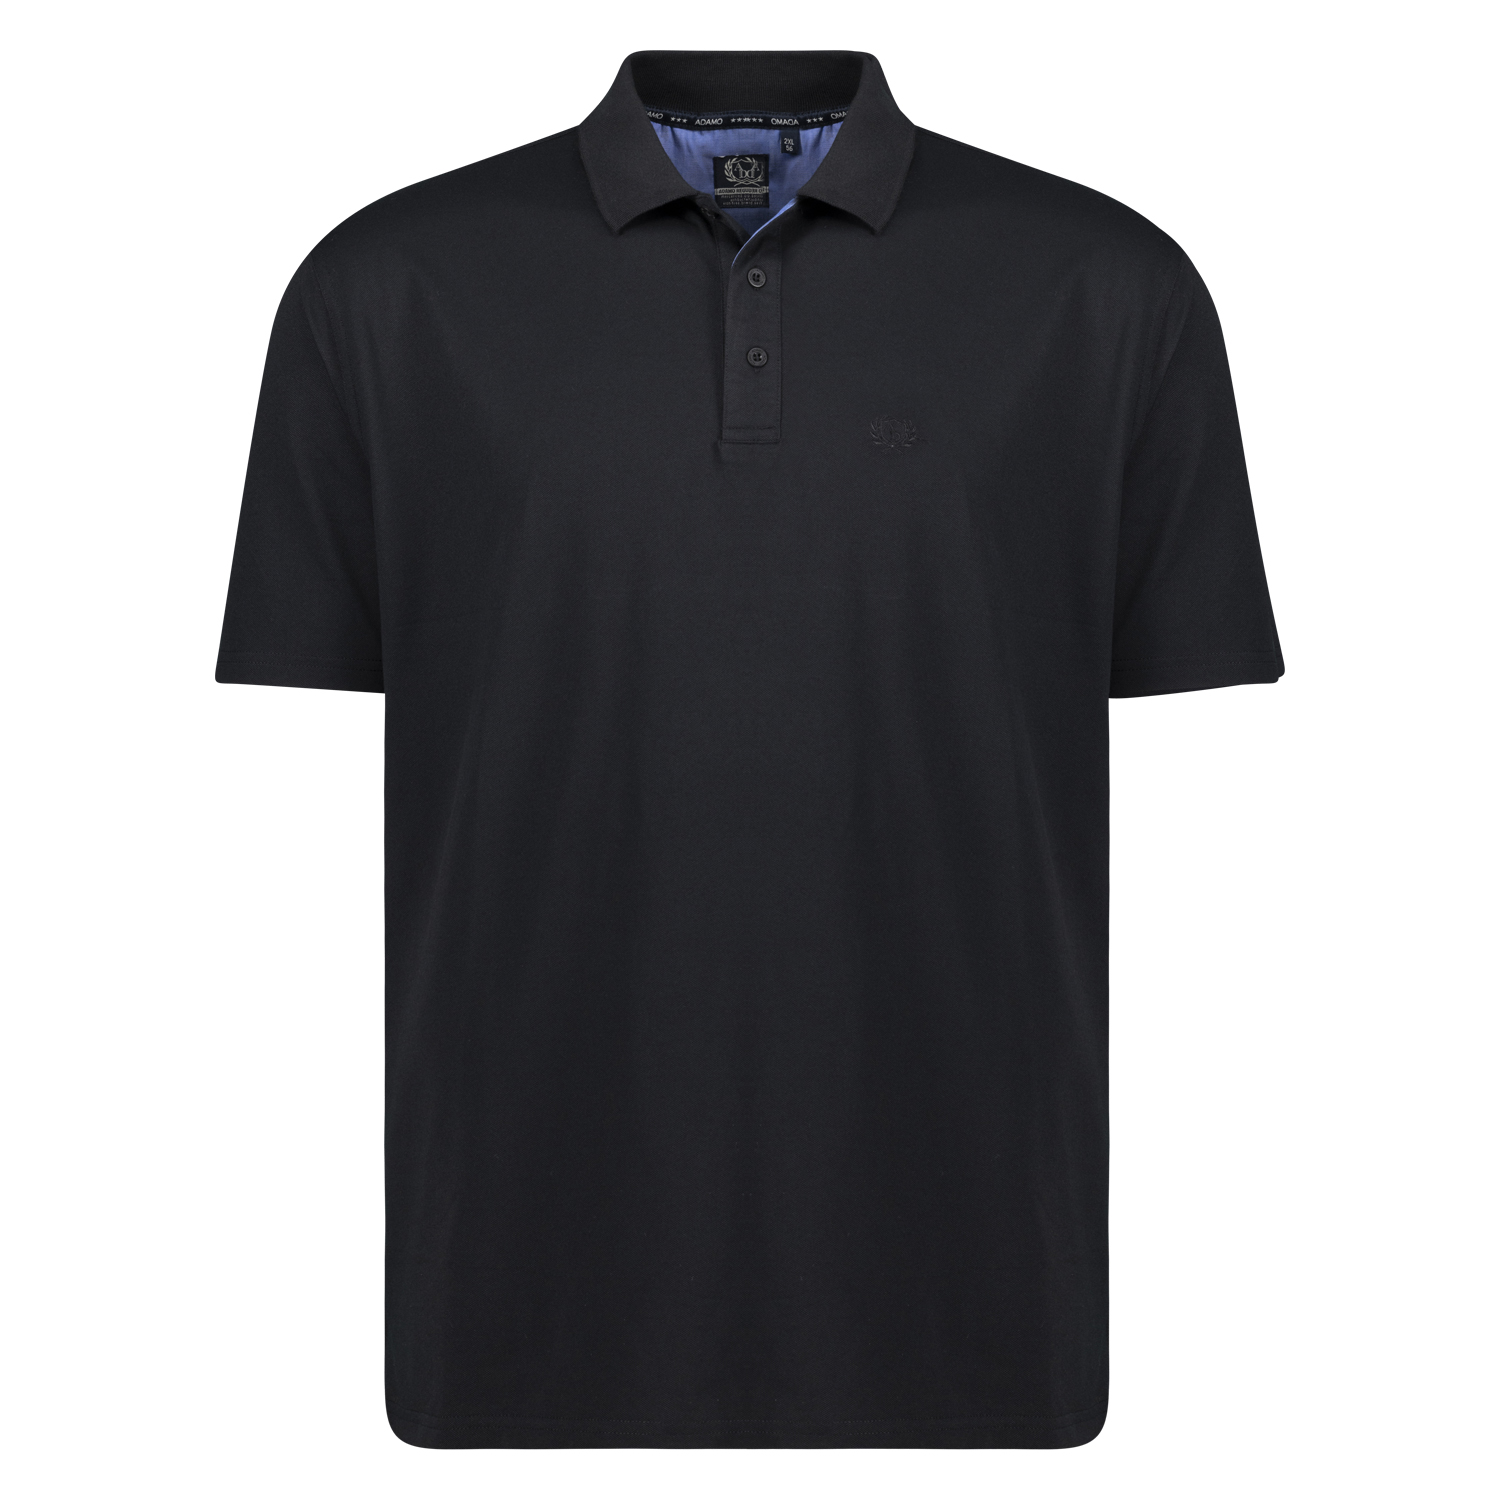 Black short sleeve polo shirt PICCO by ADAMO for men in large sizes up to 12XL